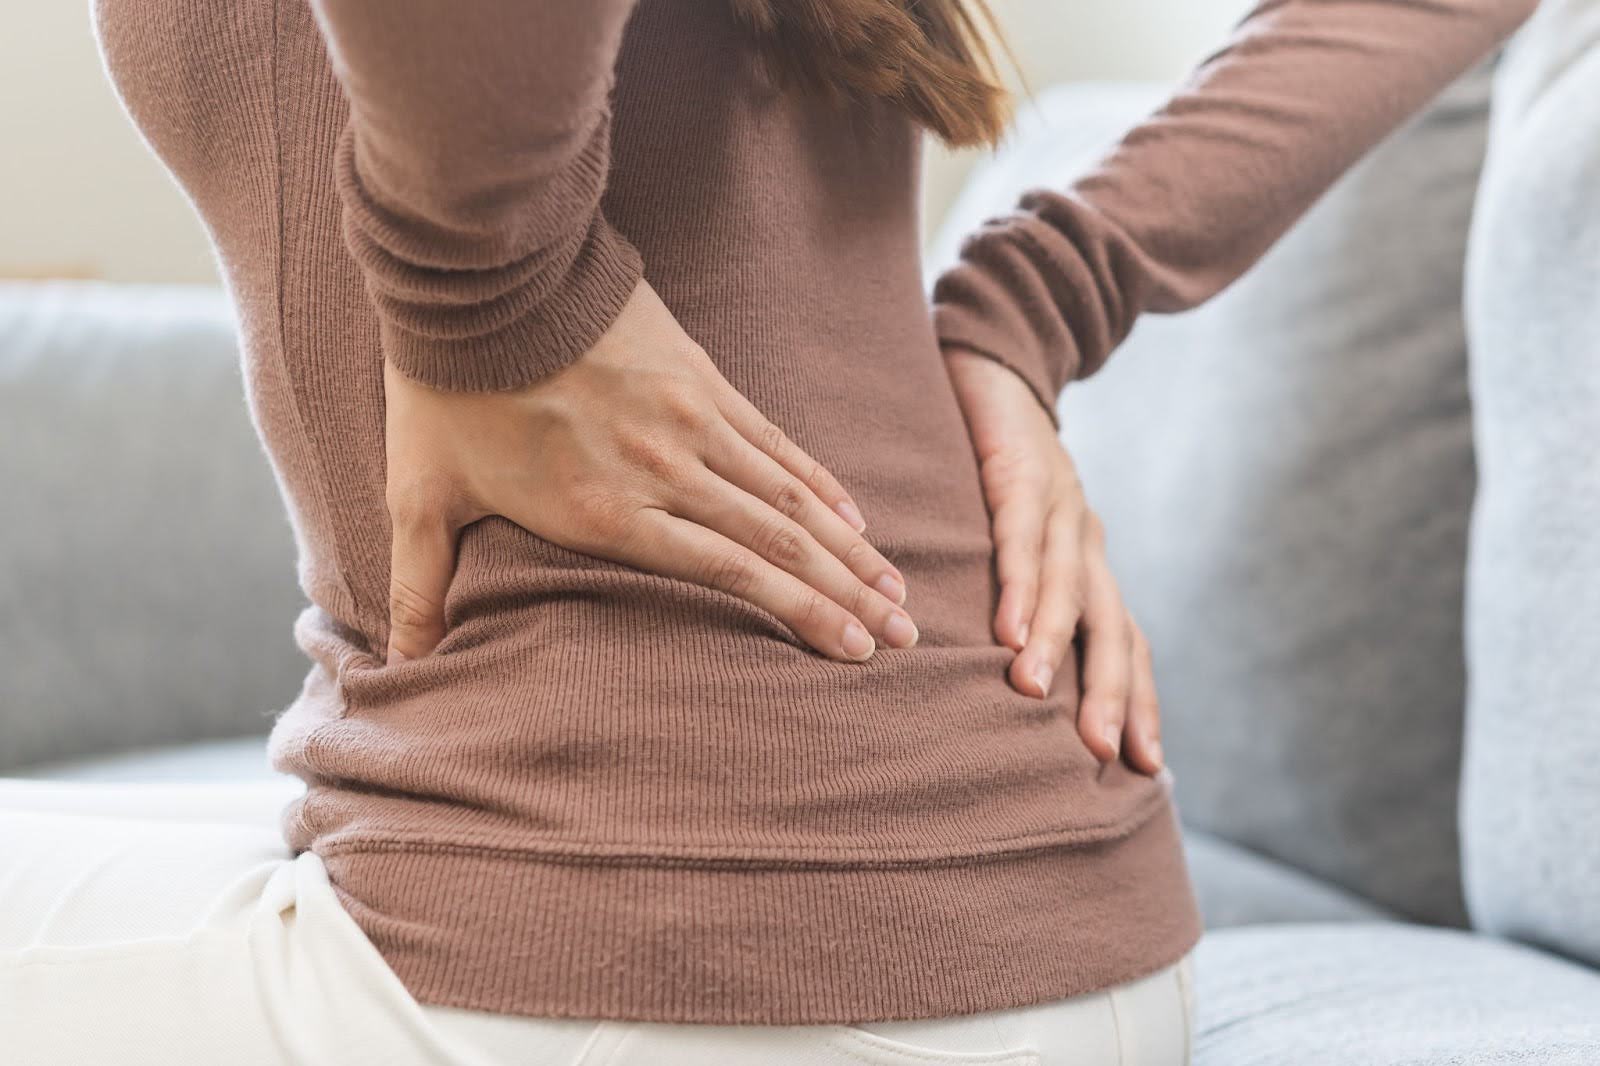 Woman holding her lower back, experiencing pain in her psoas region